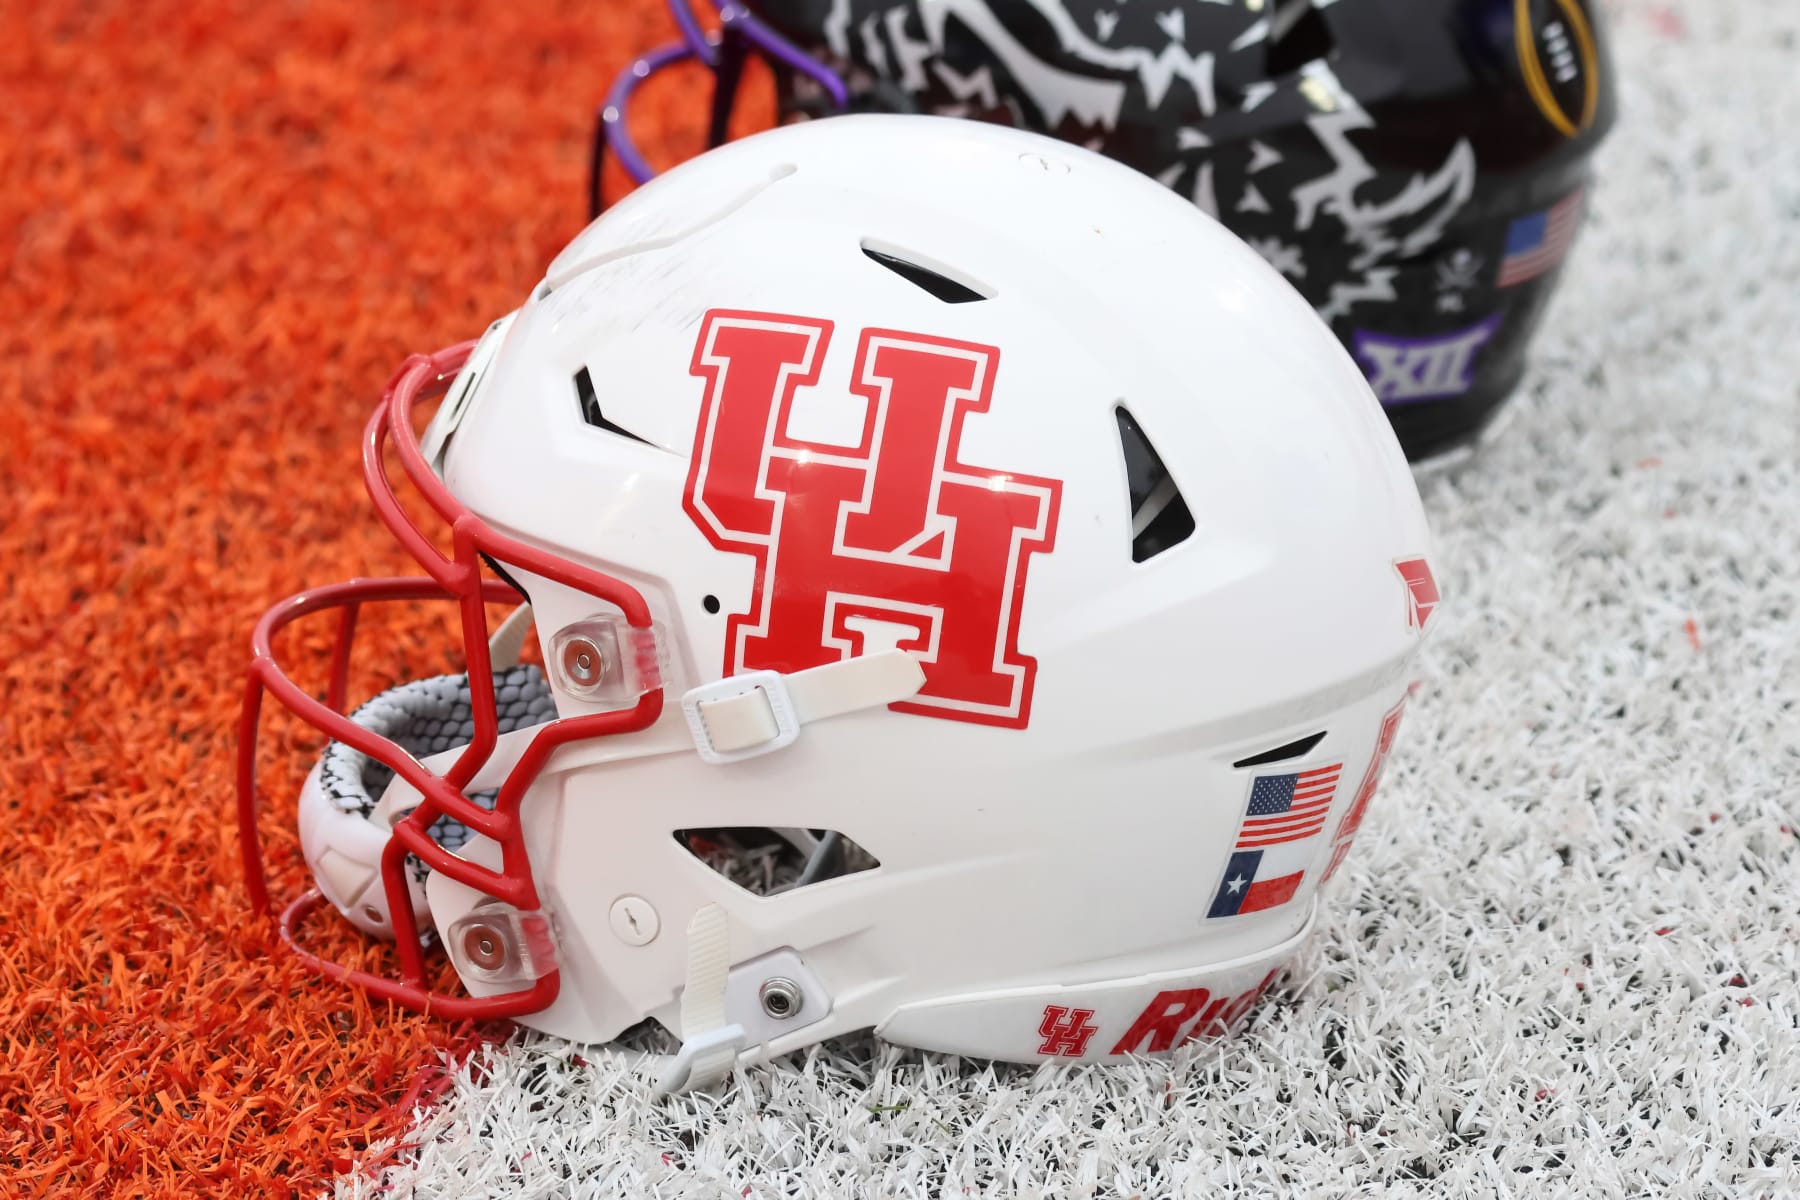 University of Houston to wear Oilers-like uniforms for Saturday's